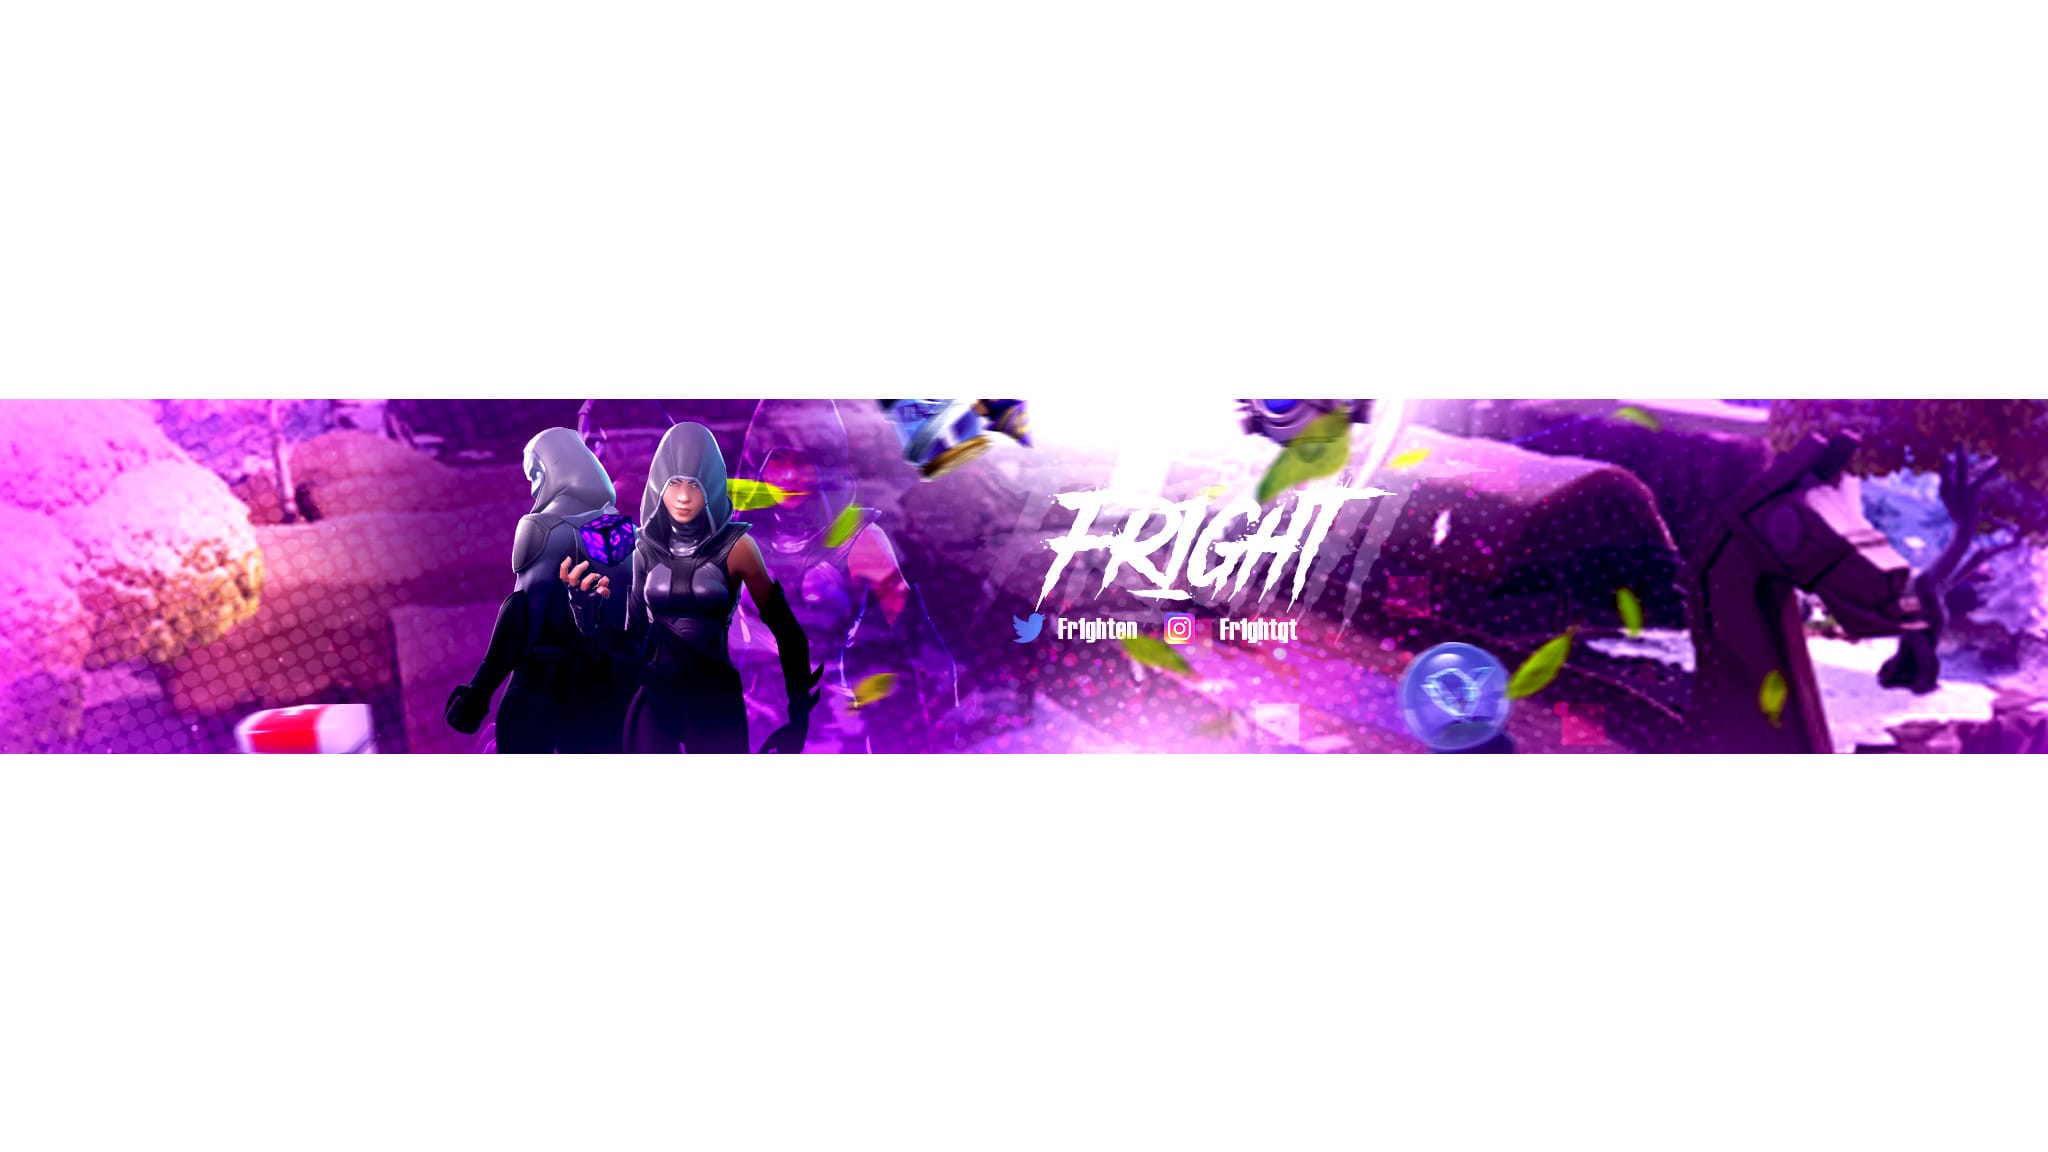 Design You A Fortnite Or Any Video Game Banner For Youtube By Bortborg